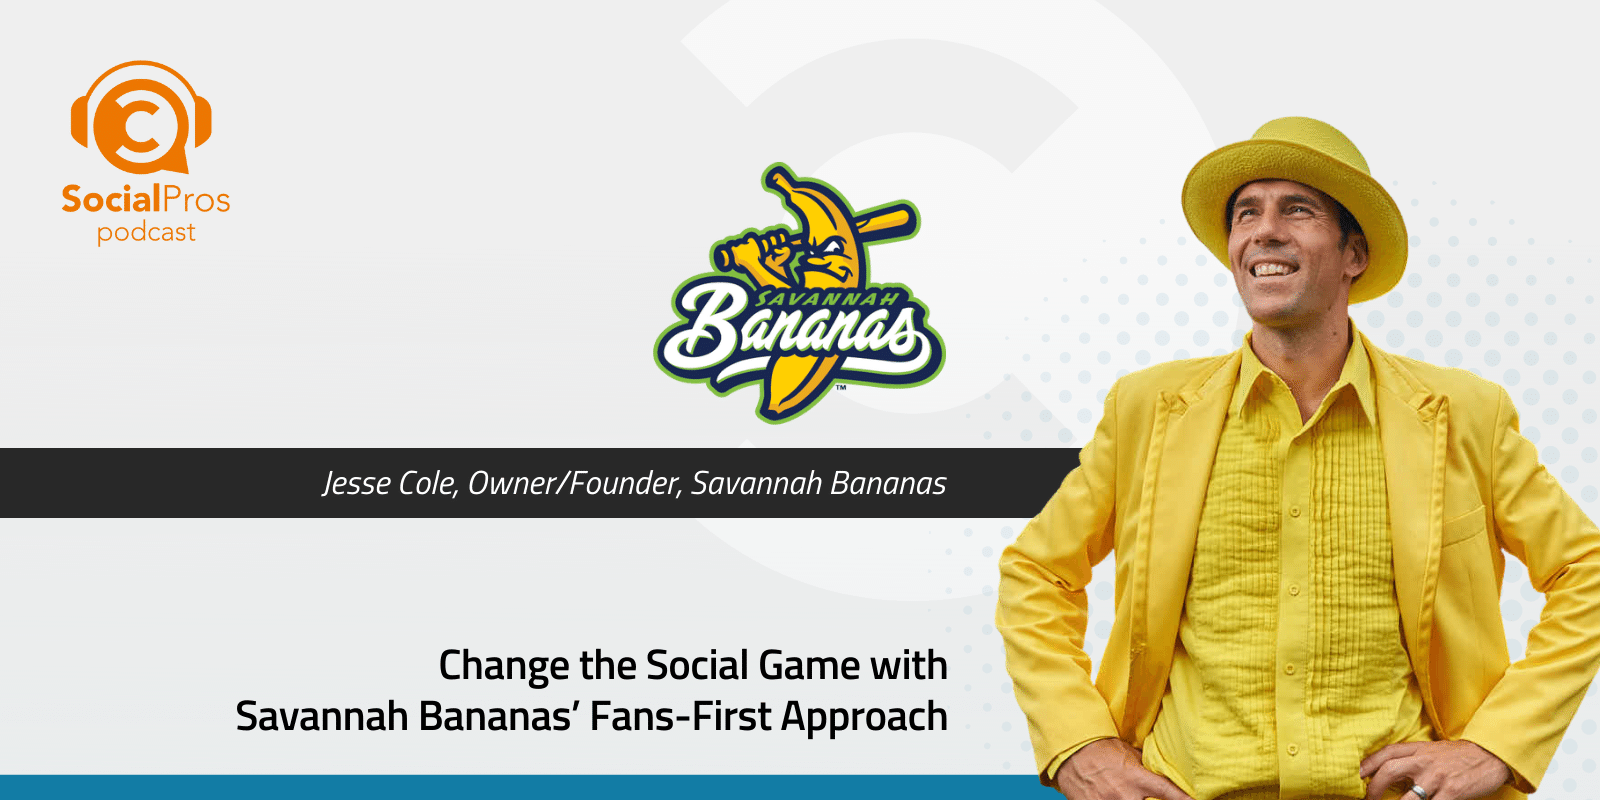 Change the Social Game with Savannah Bananas’ Fans-First Approach